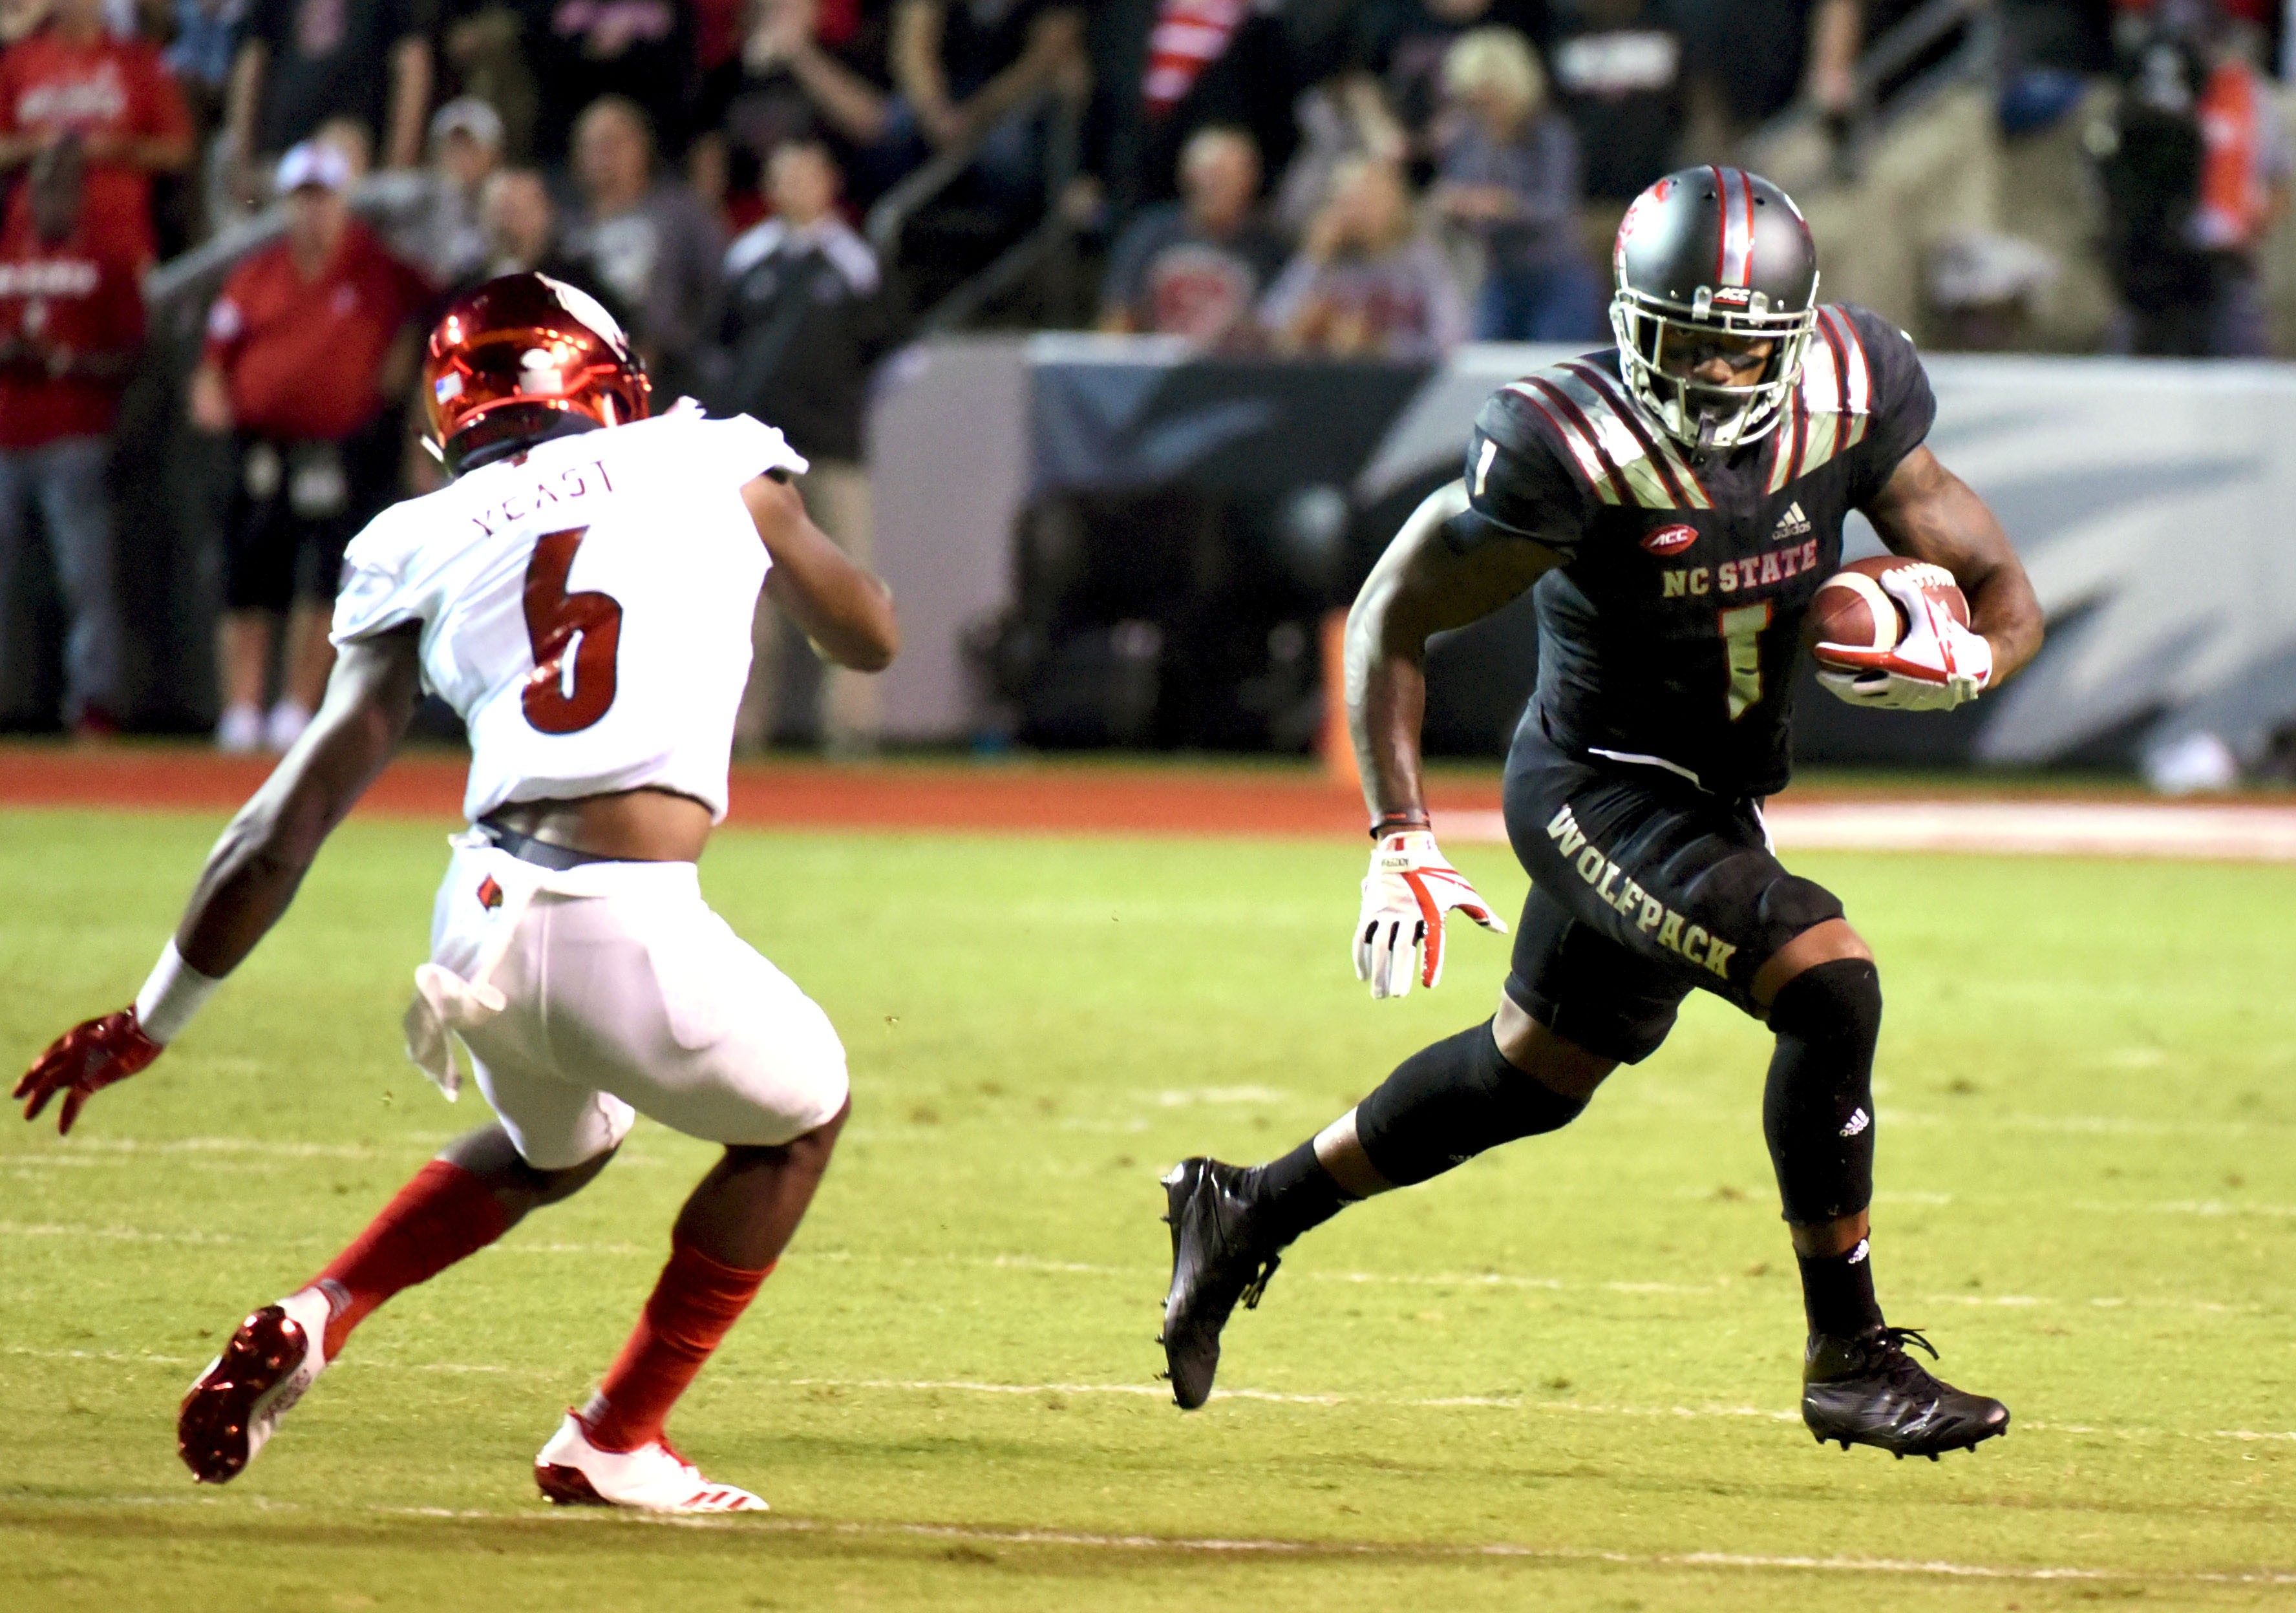 NC State Record Watch Heading Into Wake Forest